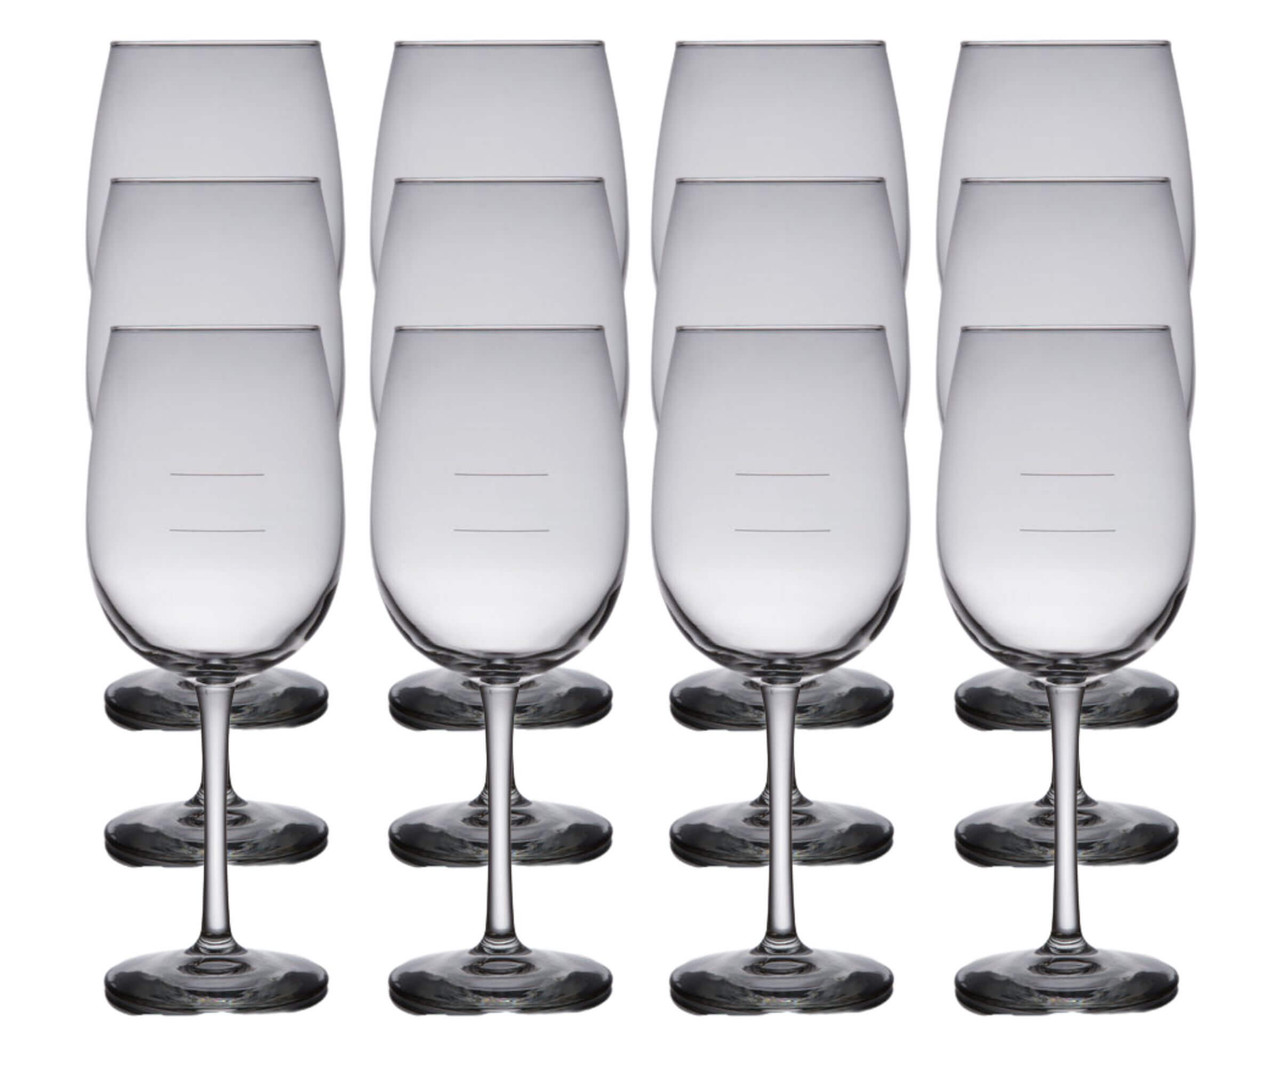 Libbey Vina Case of 12 Wine Glasses with Etched Pour Lines - 16 oz-Chicken Pieces